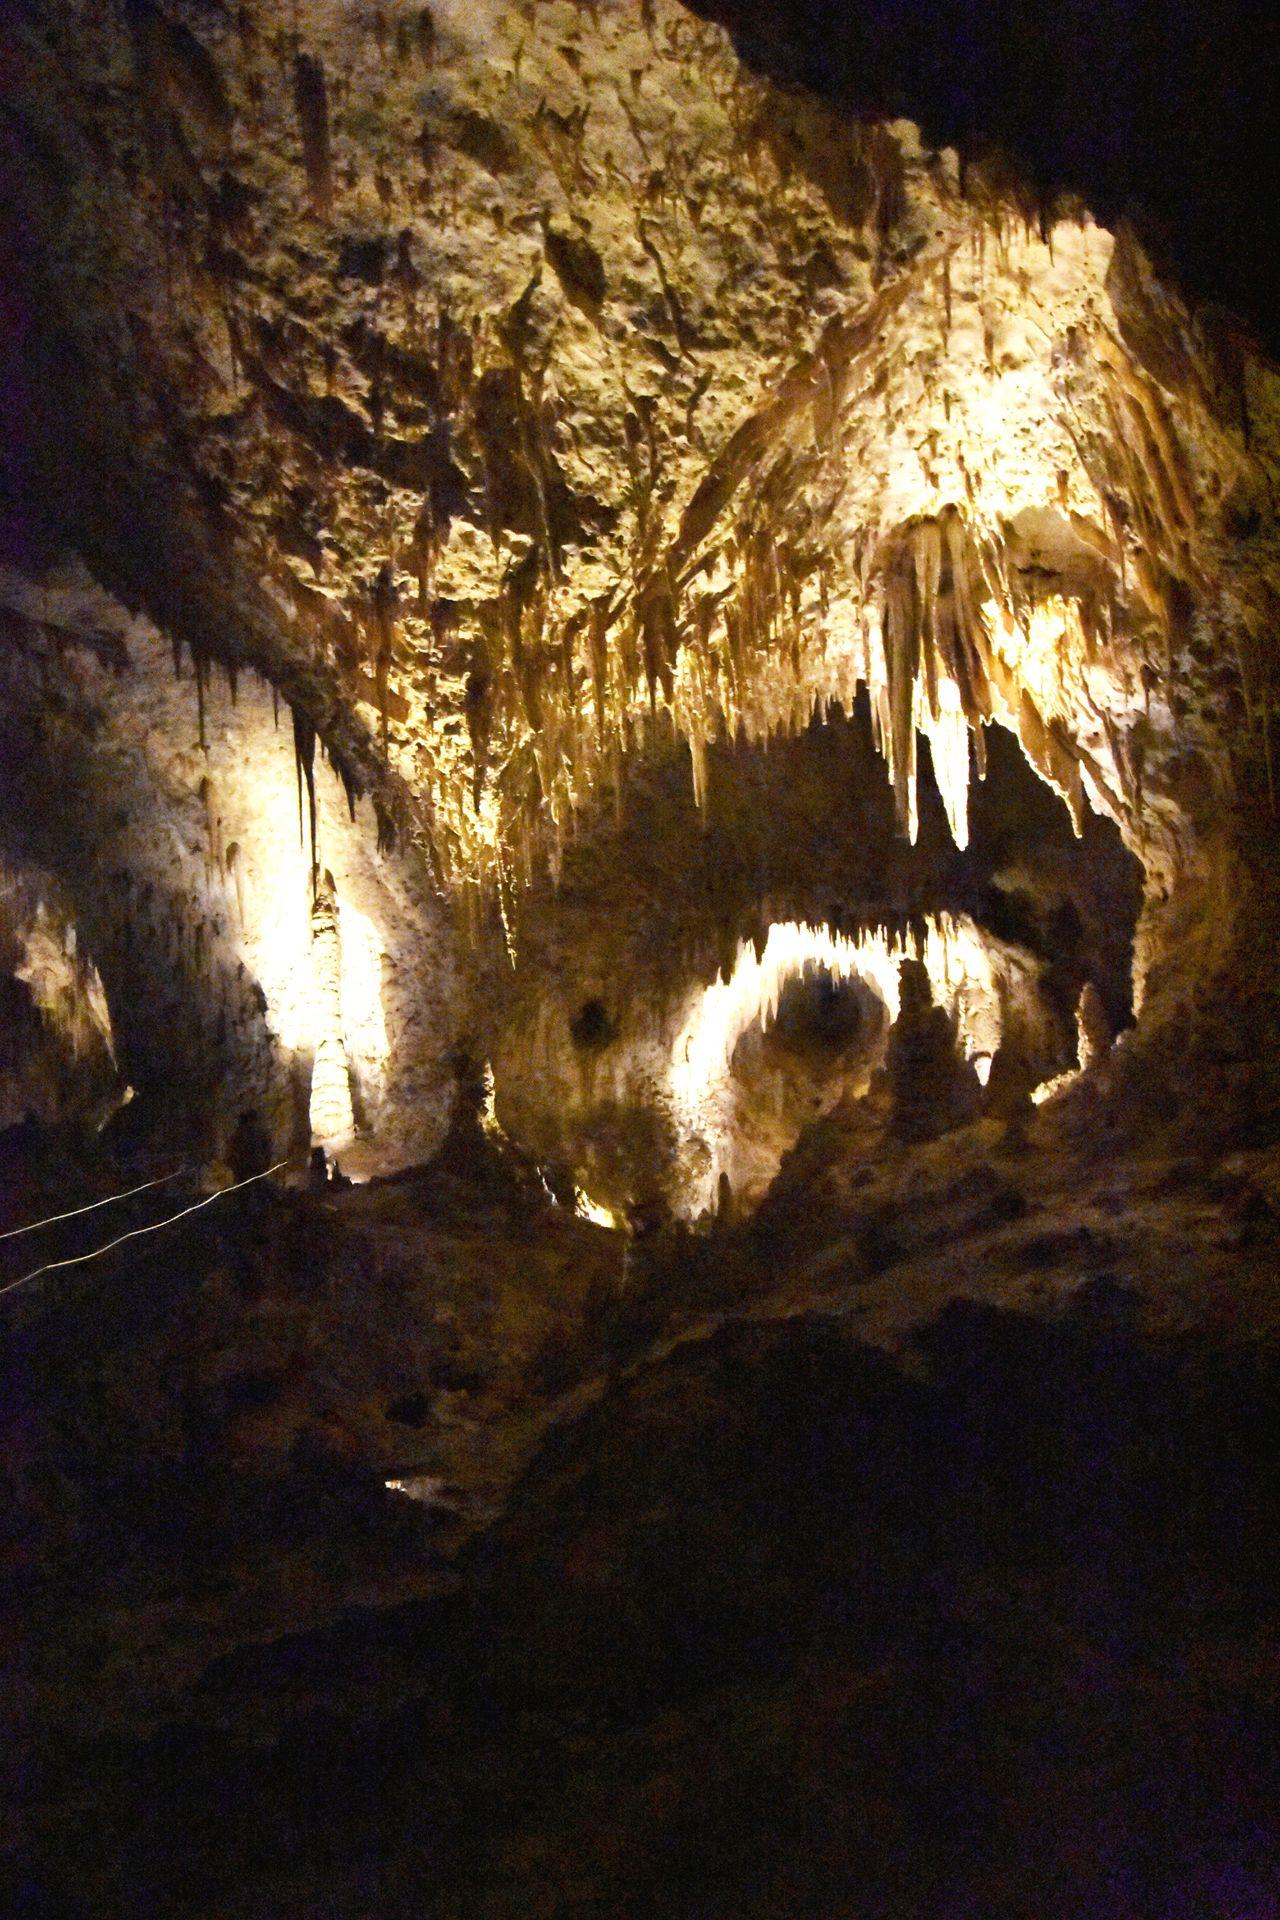 The Big Room inside the main cave in Carlsbad Caverns National Park